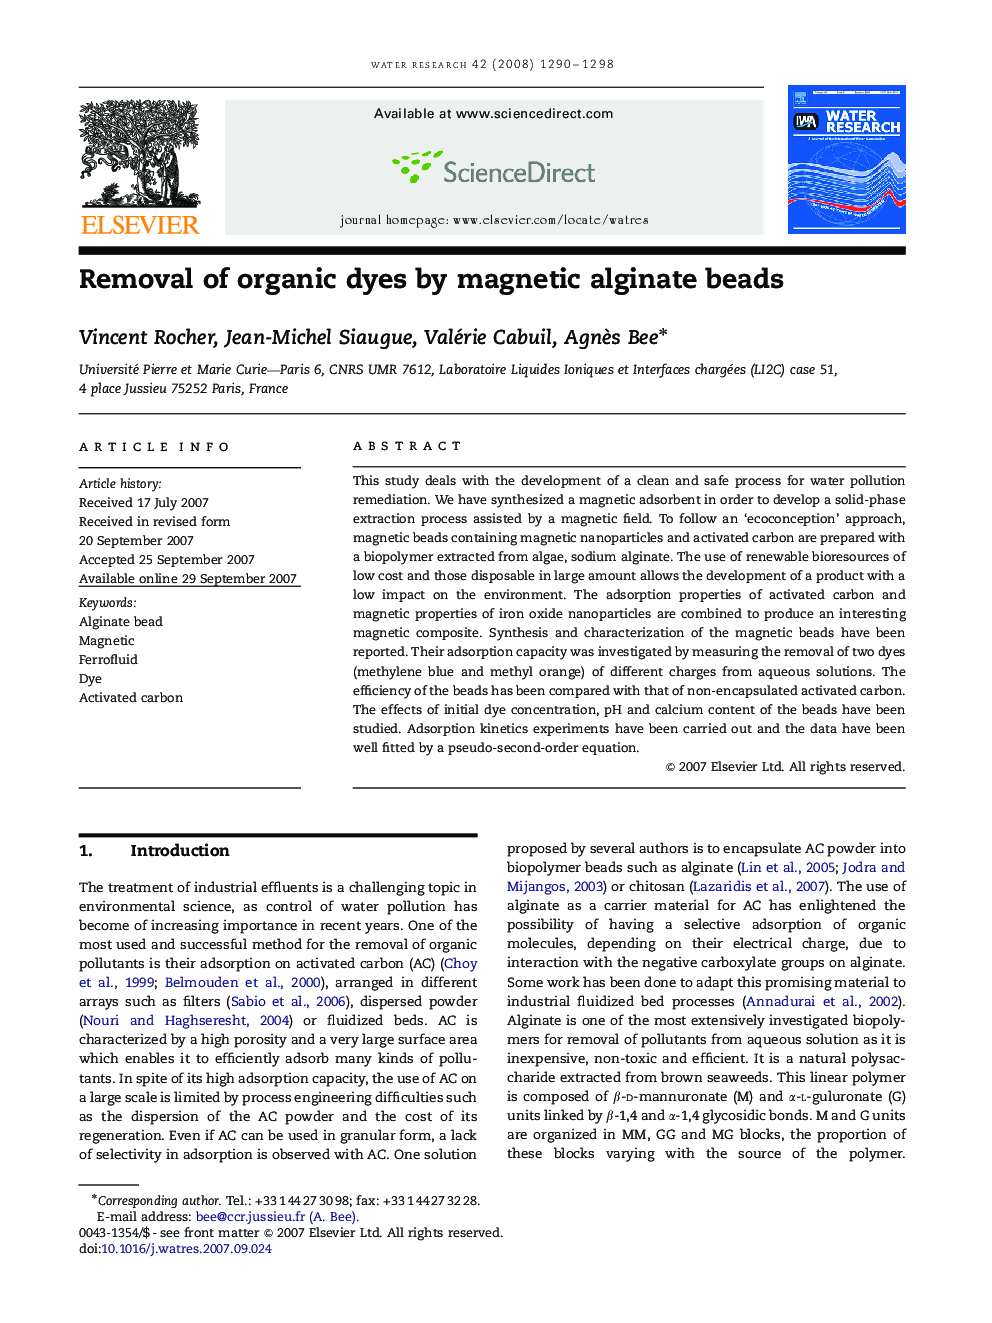 Removal of organic dyes by magnetic alginate beads